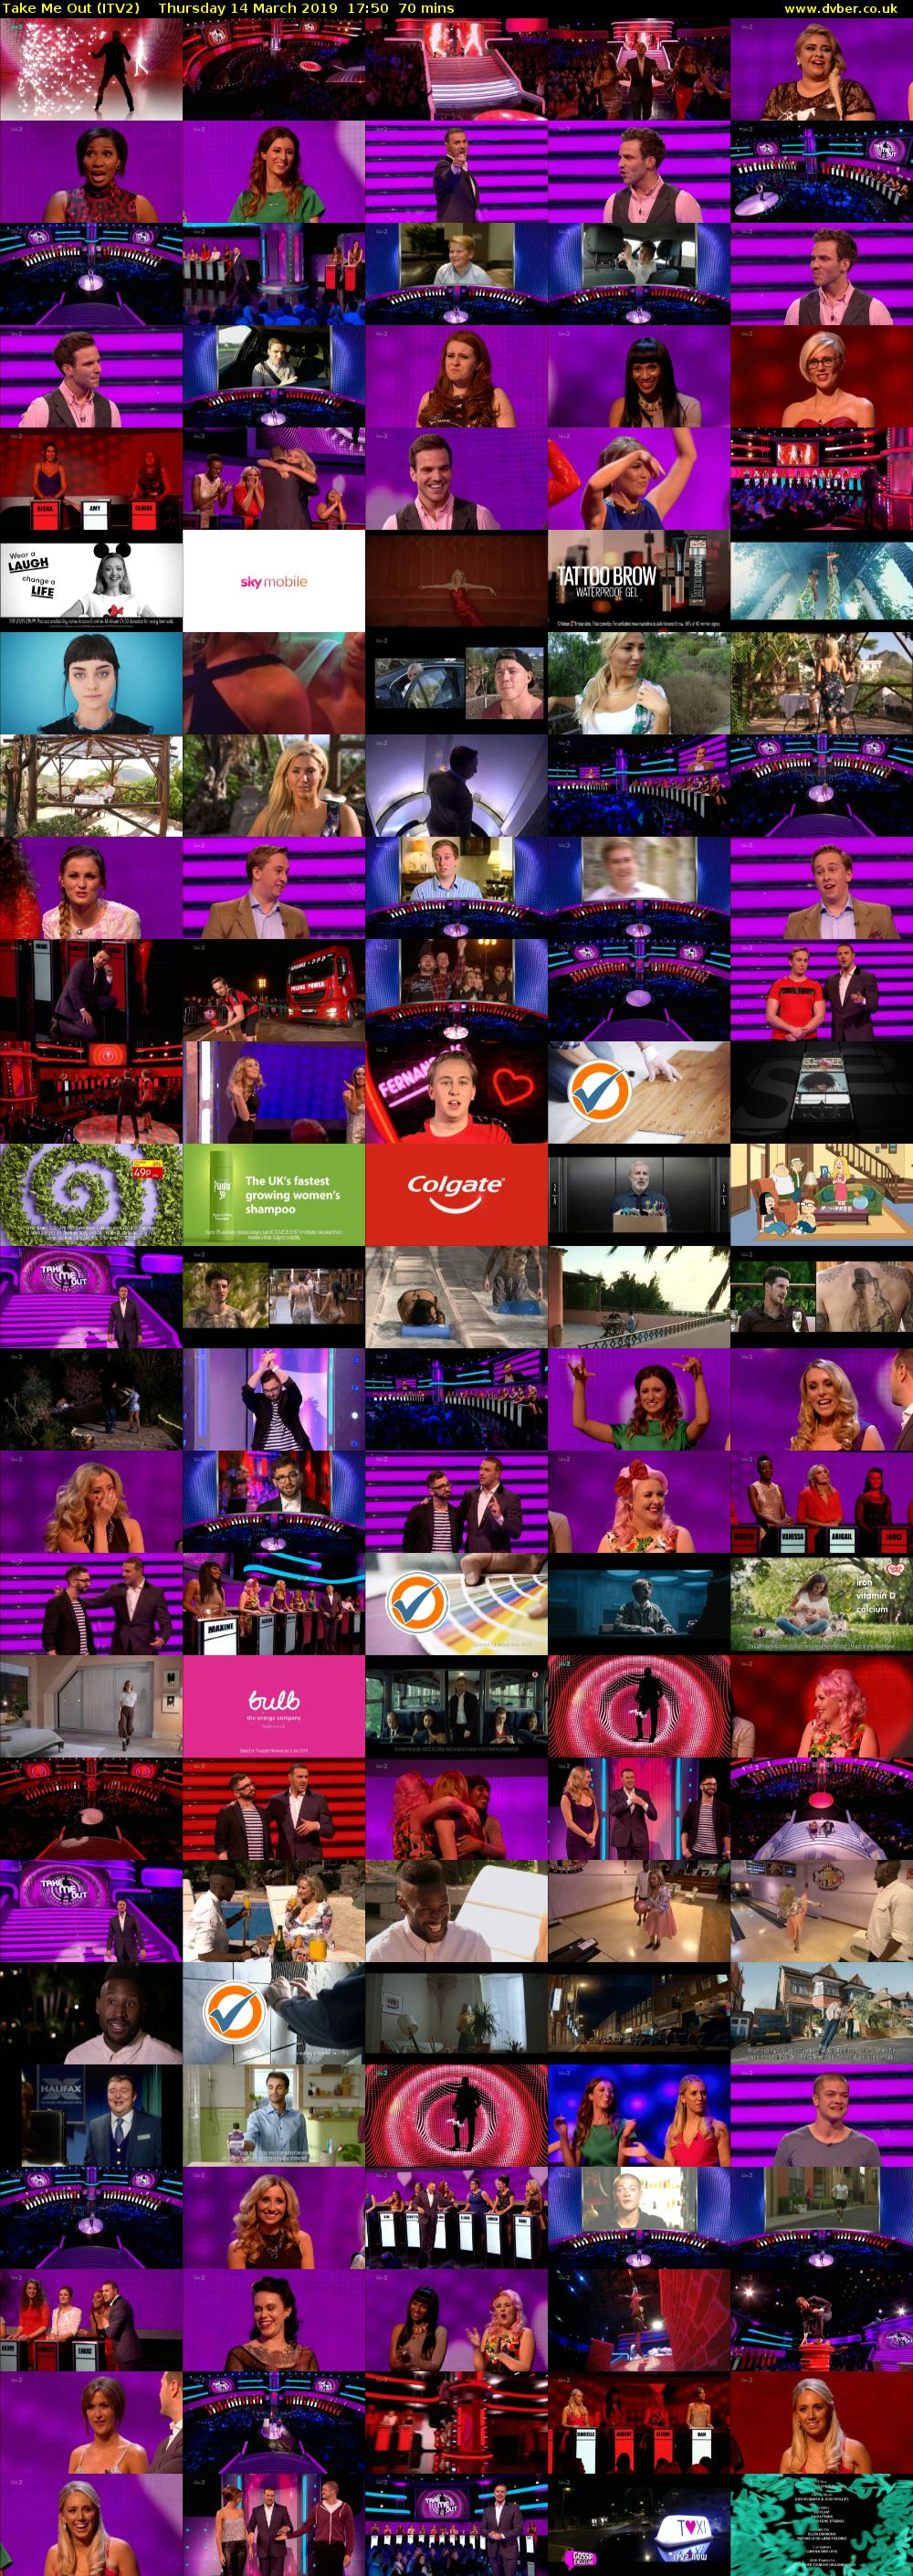 Take Me Out (ITV2) Thursday 14 March 2019 17:50 - 19:00